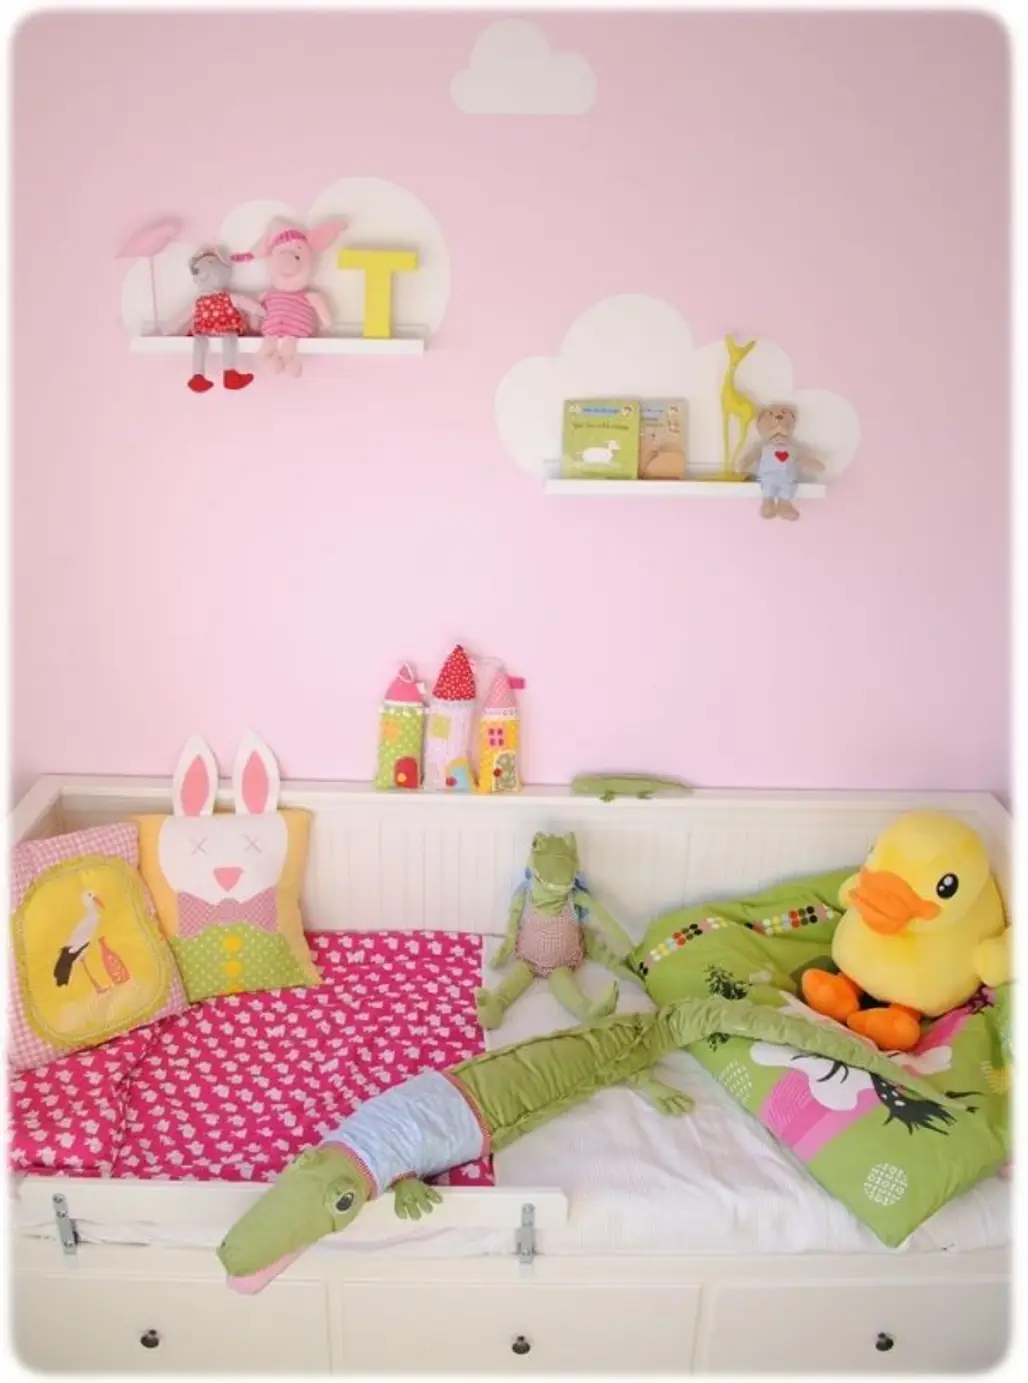 pink,product,room,furniture,play,